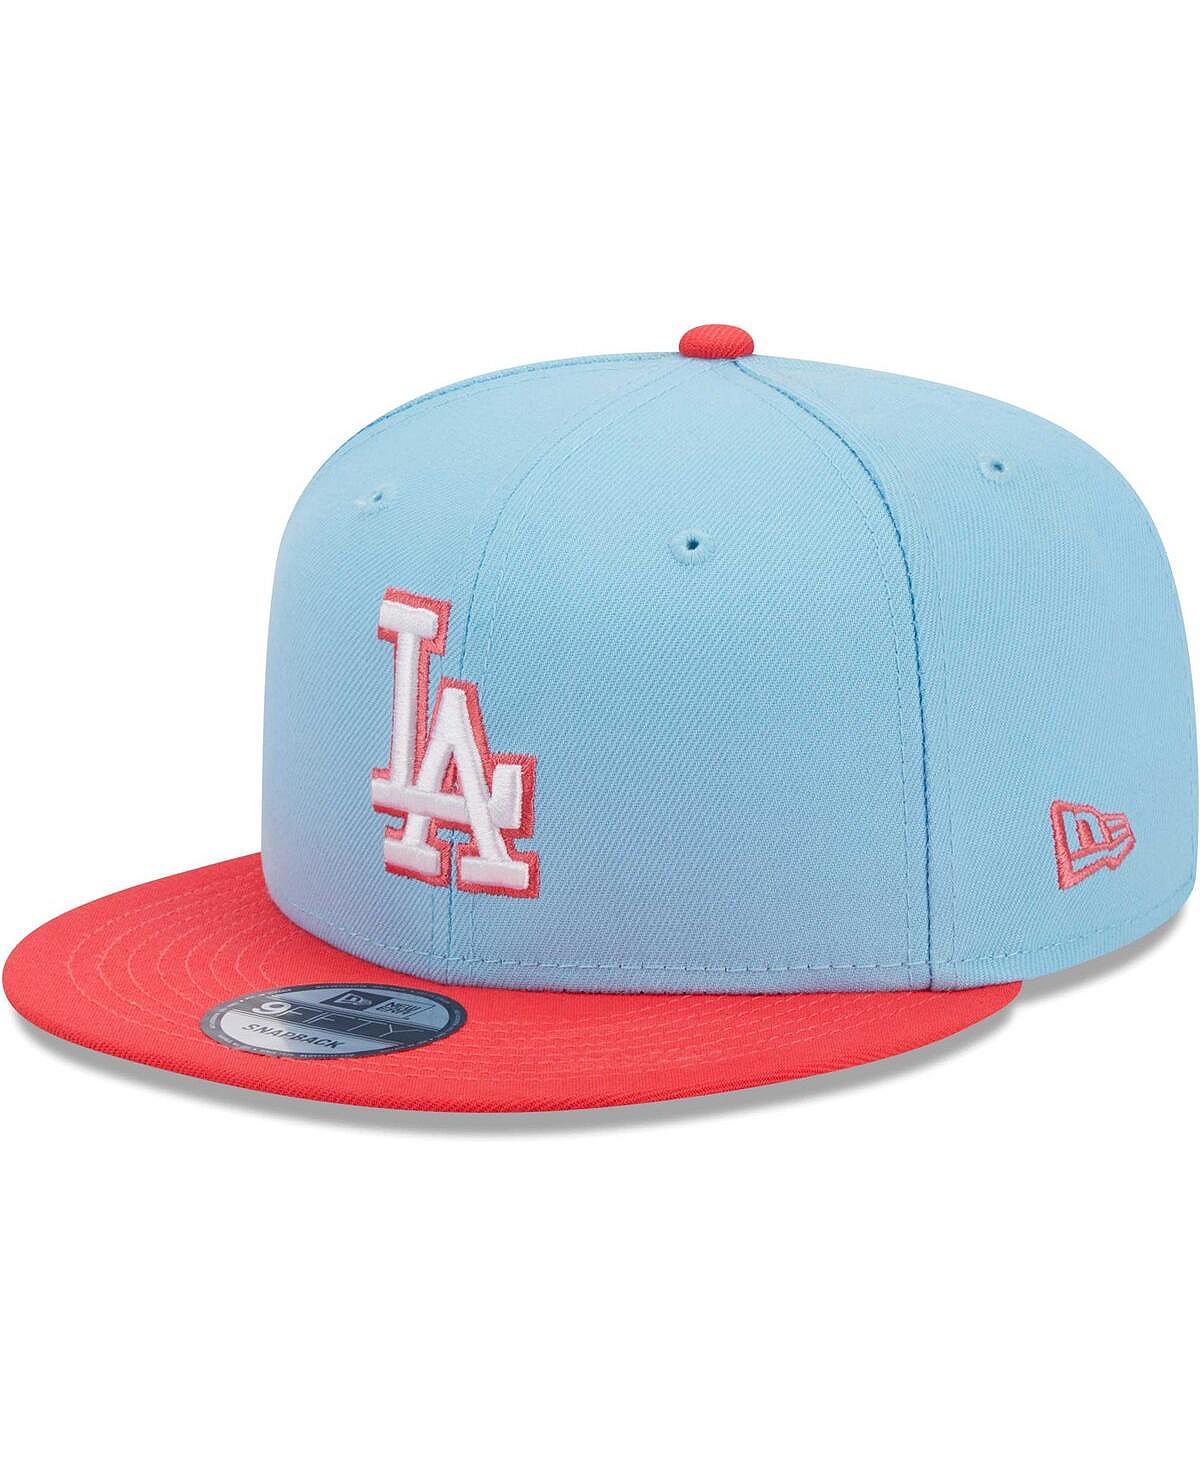 Мужская голубая и красная кепка Los Angeles Dodgers Spring Basic двухцветная кепка Snapback 9FIFTY New Era new 300w 660nm red light therapy panel 850nm near infrared led therapy light device for skin pain relief red led grow light